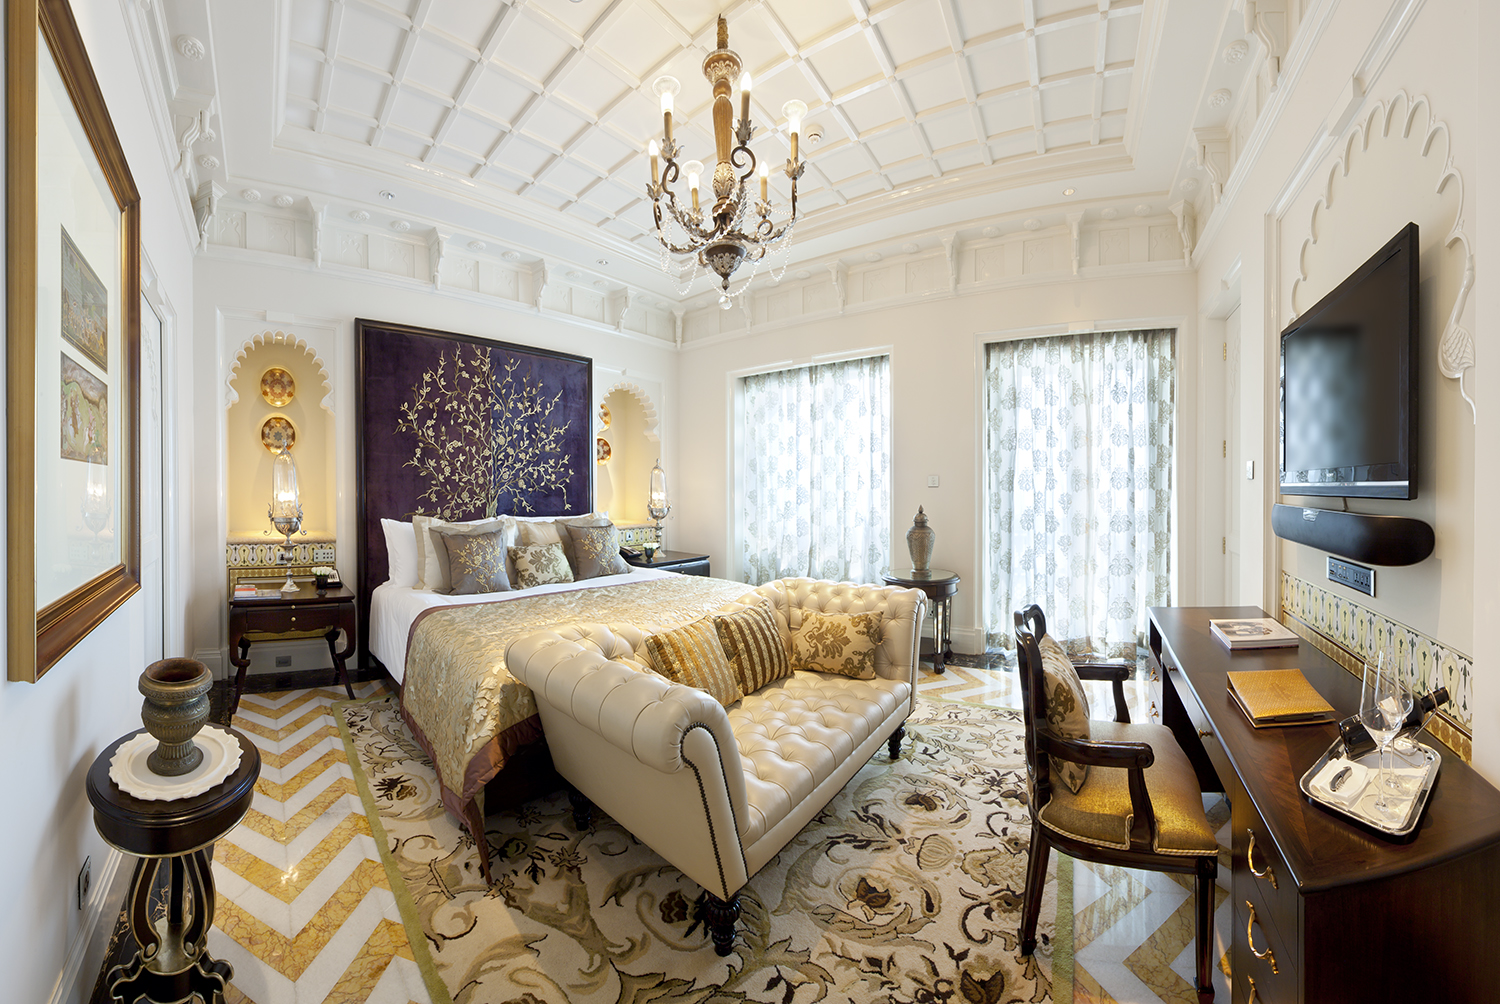 Taj-Mahal-Palace Top 25 Most Luxurious Rooms in the World